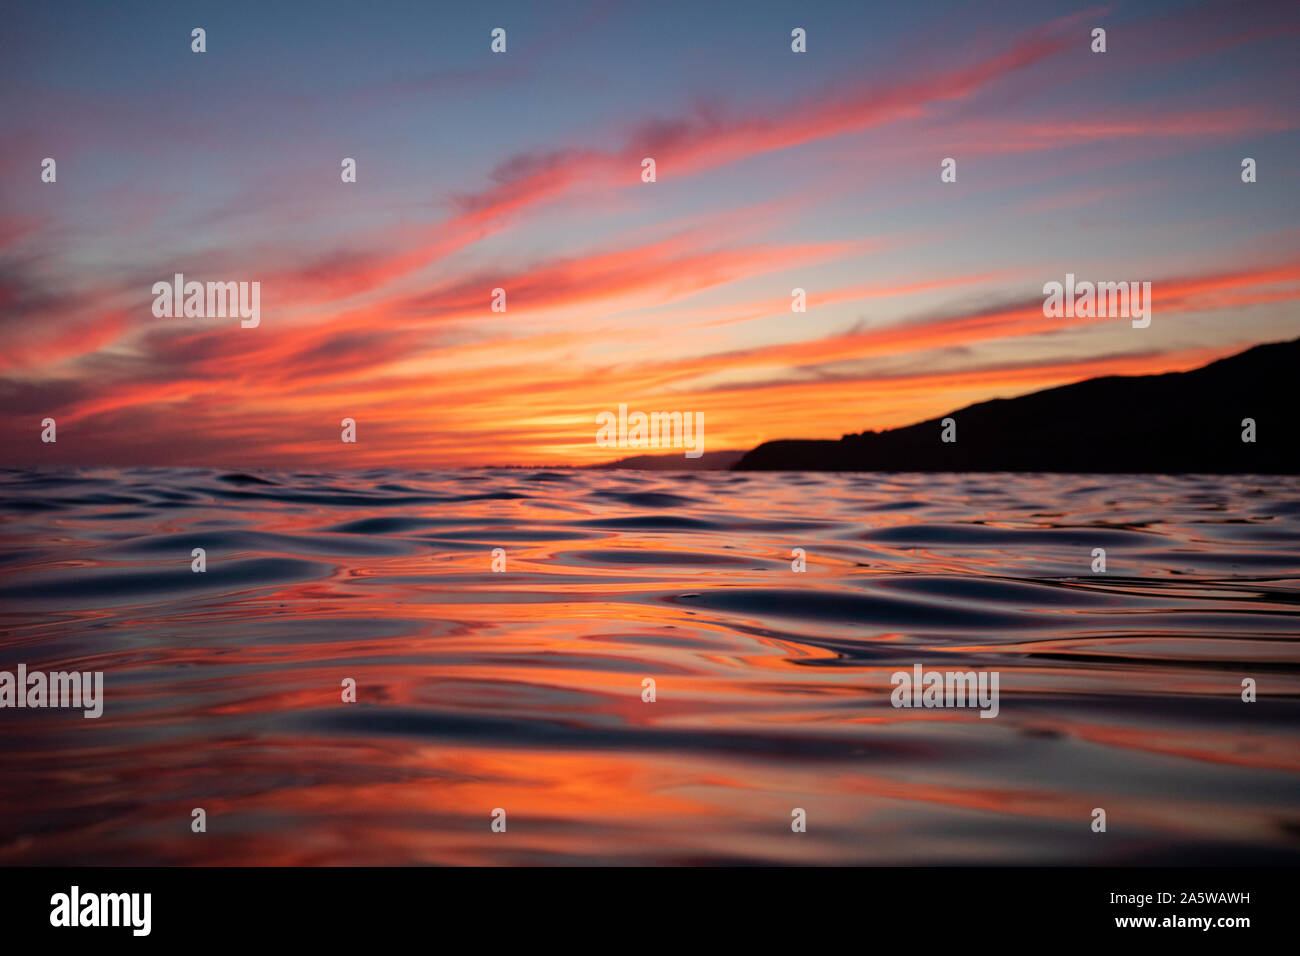 The ocean surface reflects vibrant sunset afterglow from colorful clouds. Stock Photo